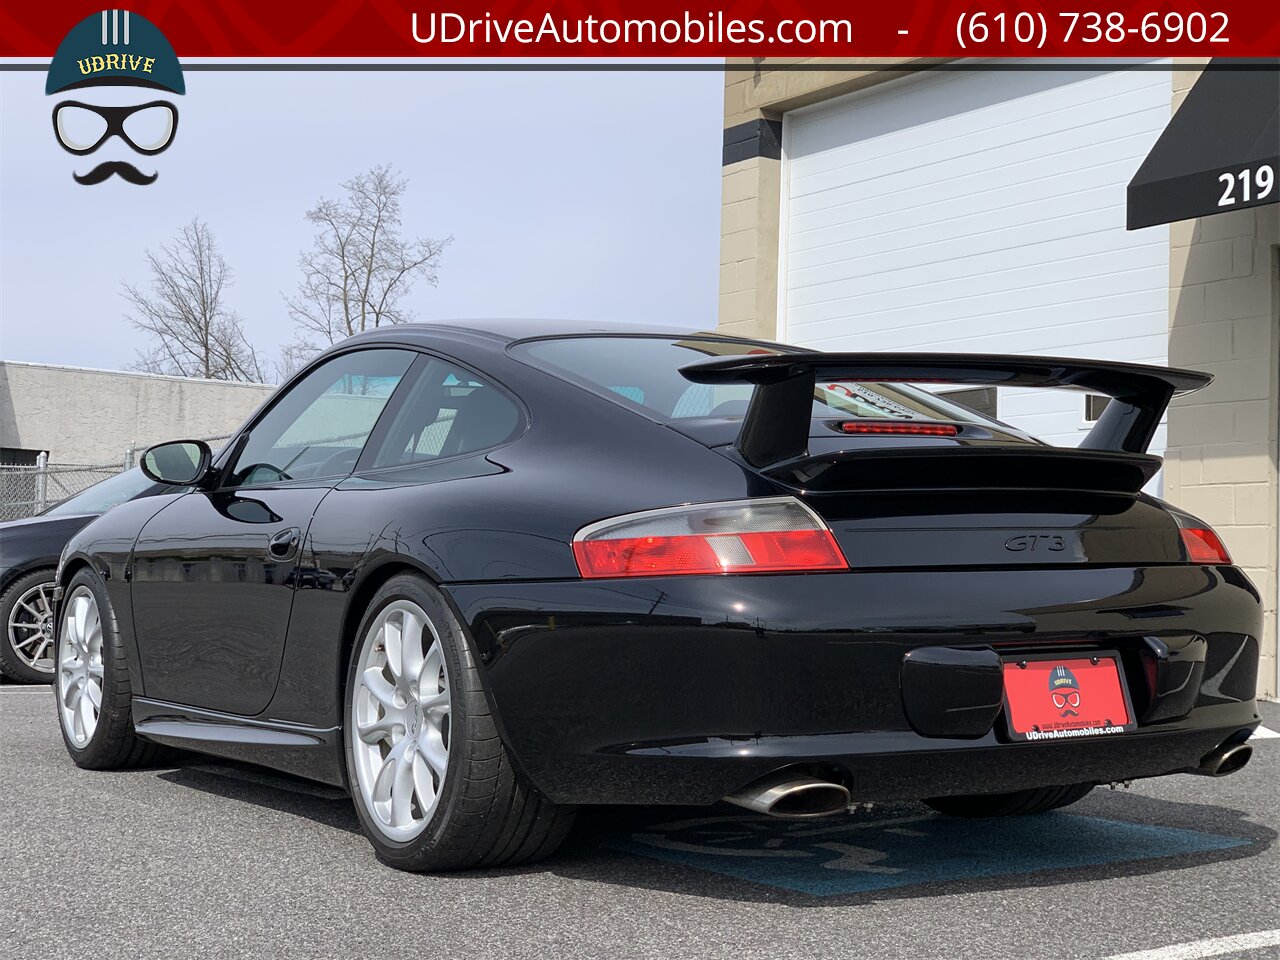 2004 Porsche 911 GT3 996 PCCB Sport Seats Red Stitching $118k MSRP   - Photo 8 - West Chester, PA 19382